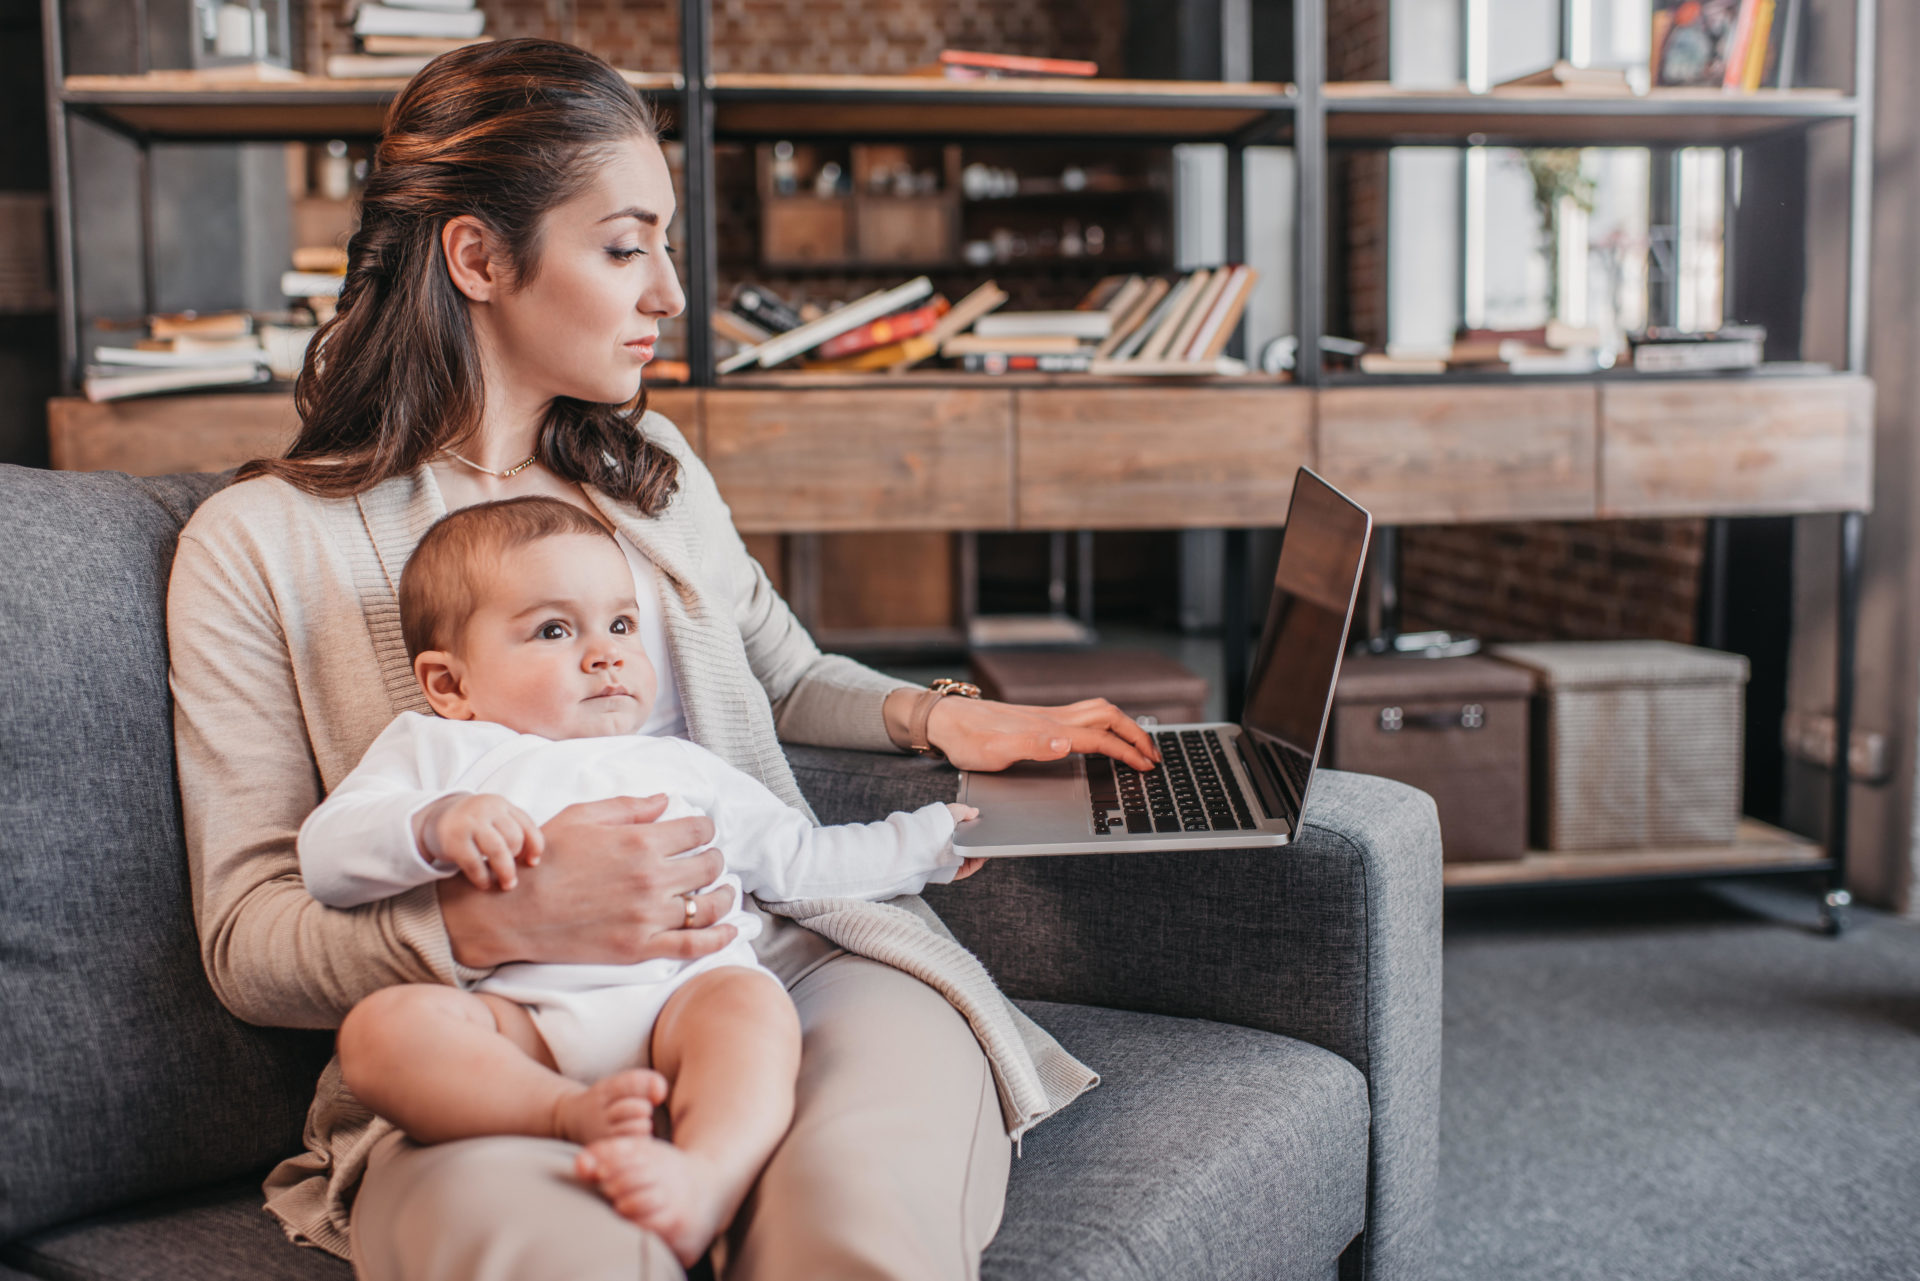 A busy woman working on her laptop while holding her baby in her lap. Image: LightField Studios Inc. / Alamy Stock Photo